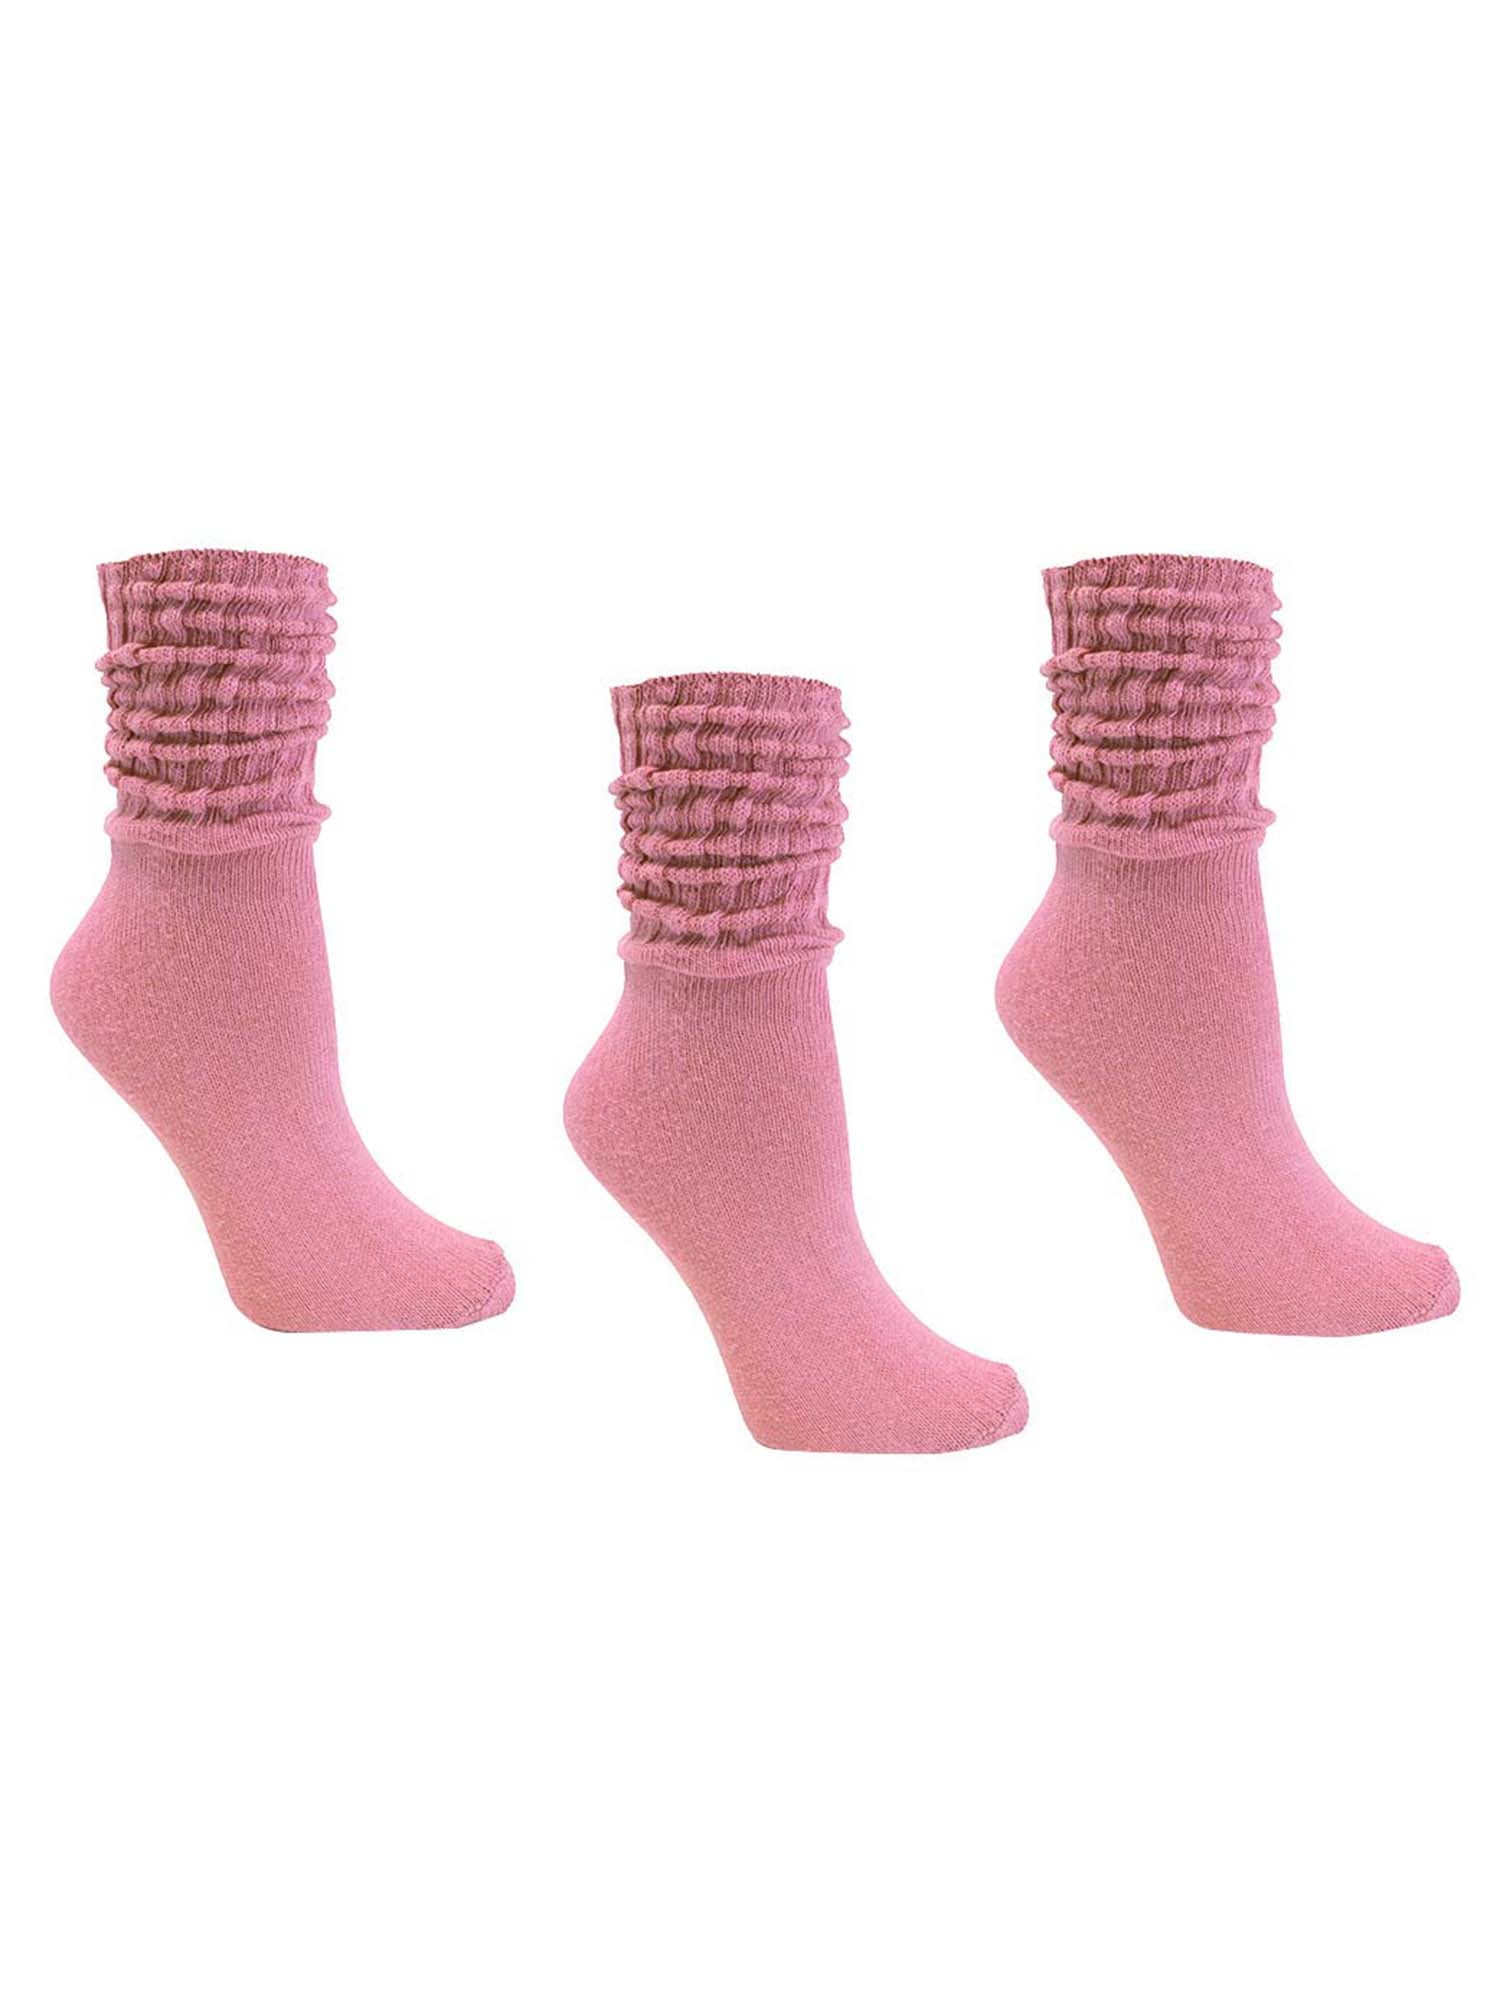 Pastel Pink All Cotton 3 Pack Knit Slouch Socks